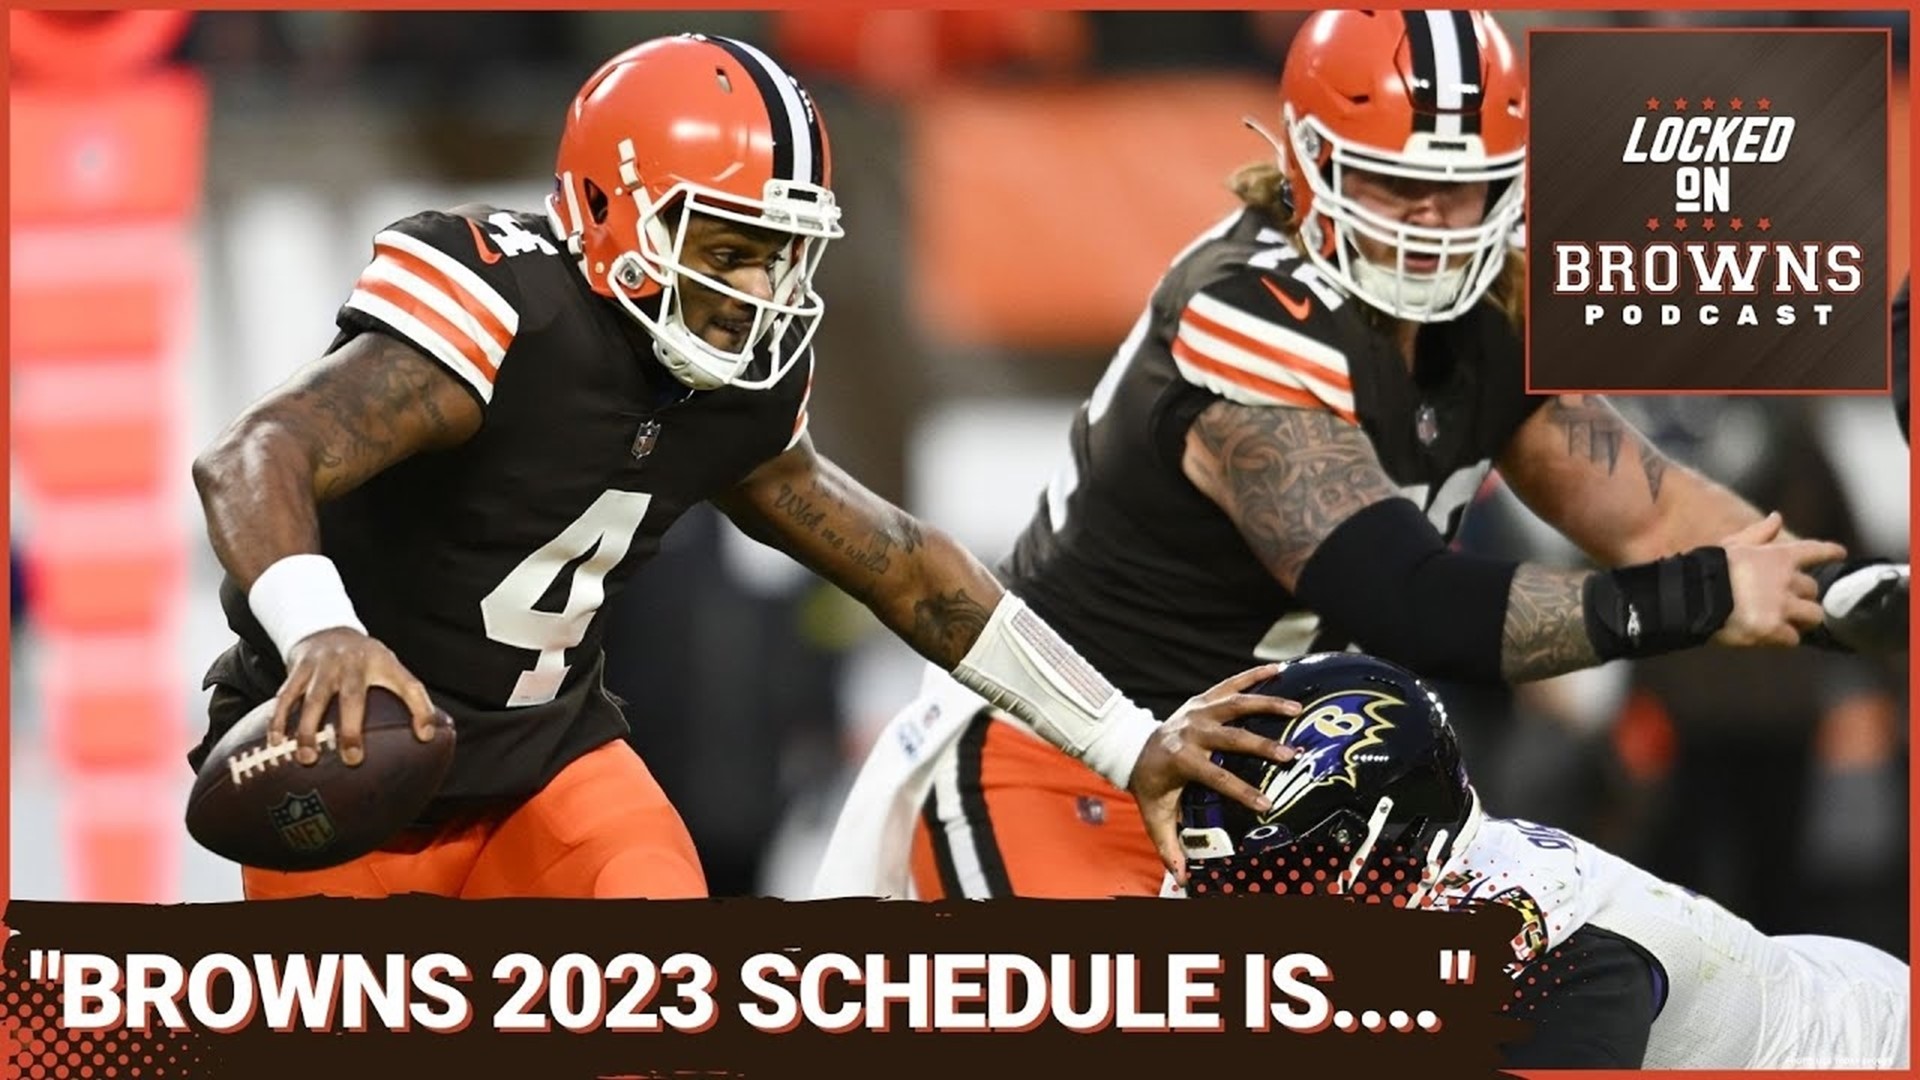 It's here! We have the Cleveland Browns 2023 schedule!